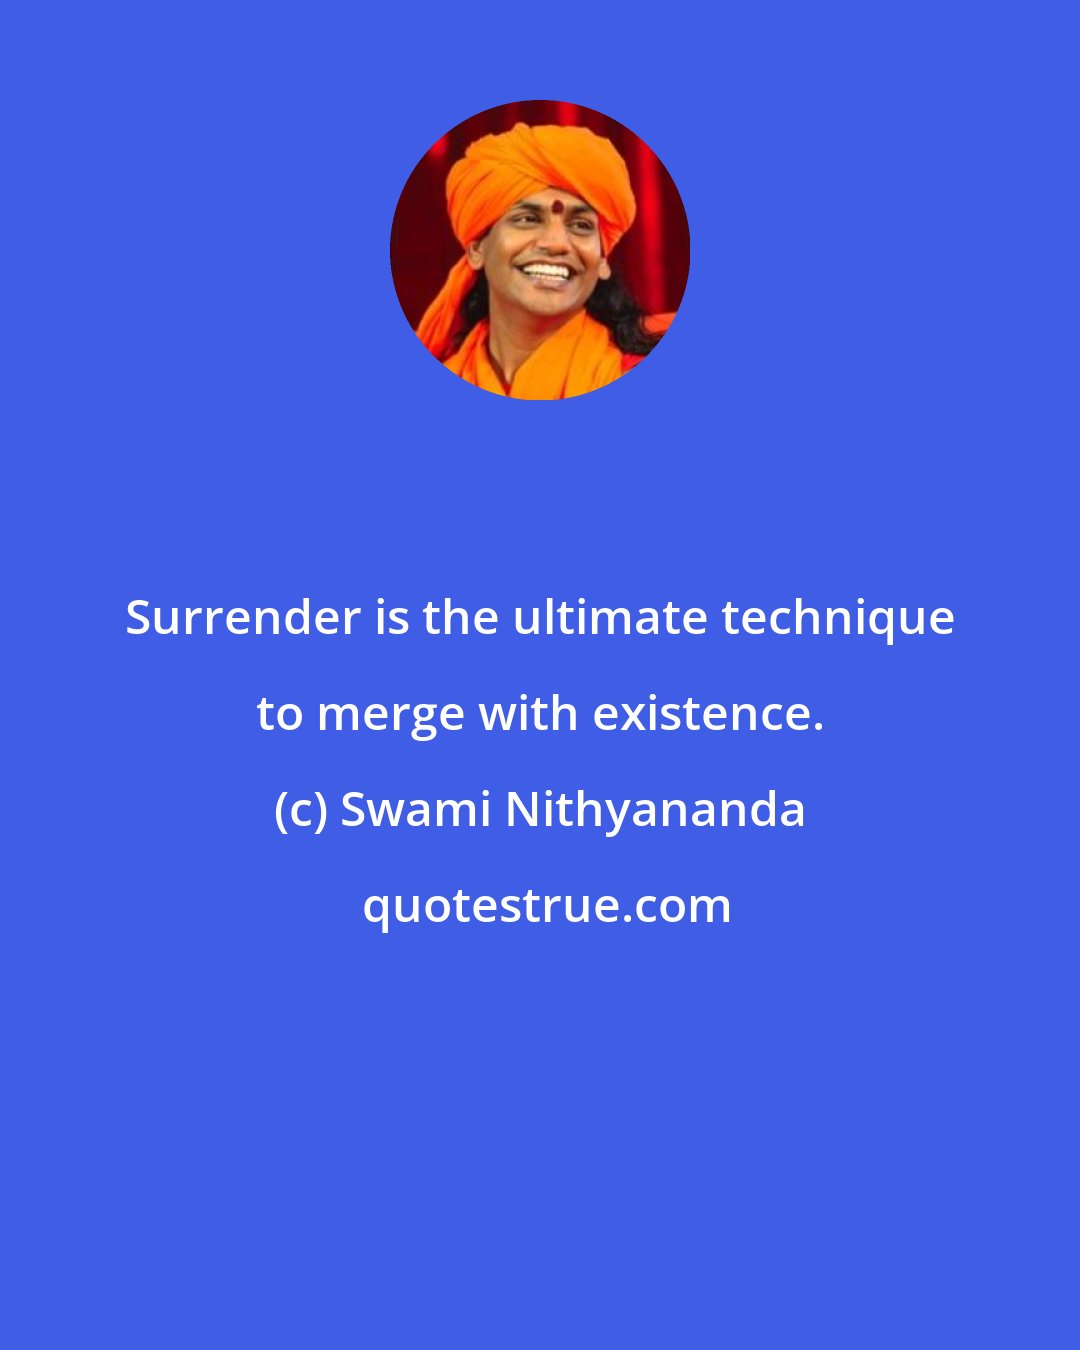 Swami Nithyananda: Surrender is the ultimate technique to merge with existence.